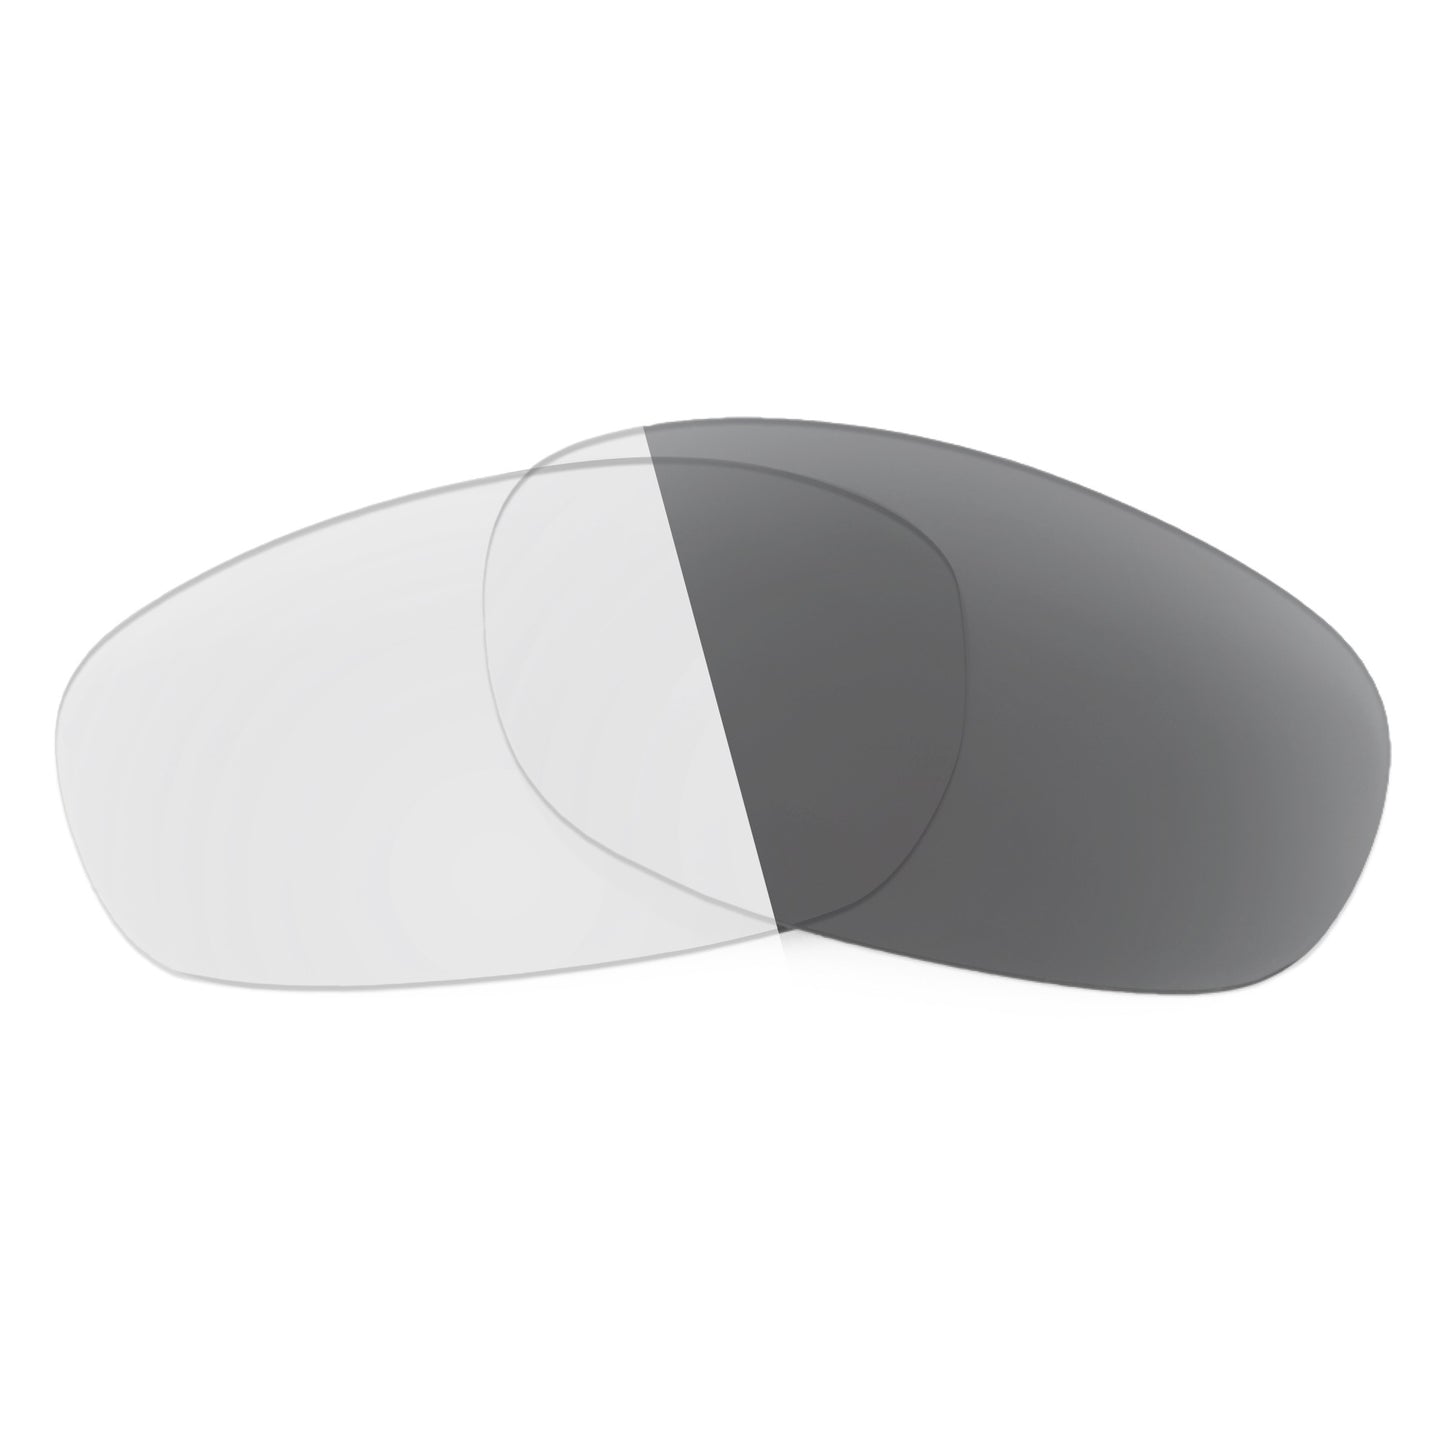 Revant replacement lenses for Native Throttle AF Non-Polarized Adapt Gray Photochromic